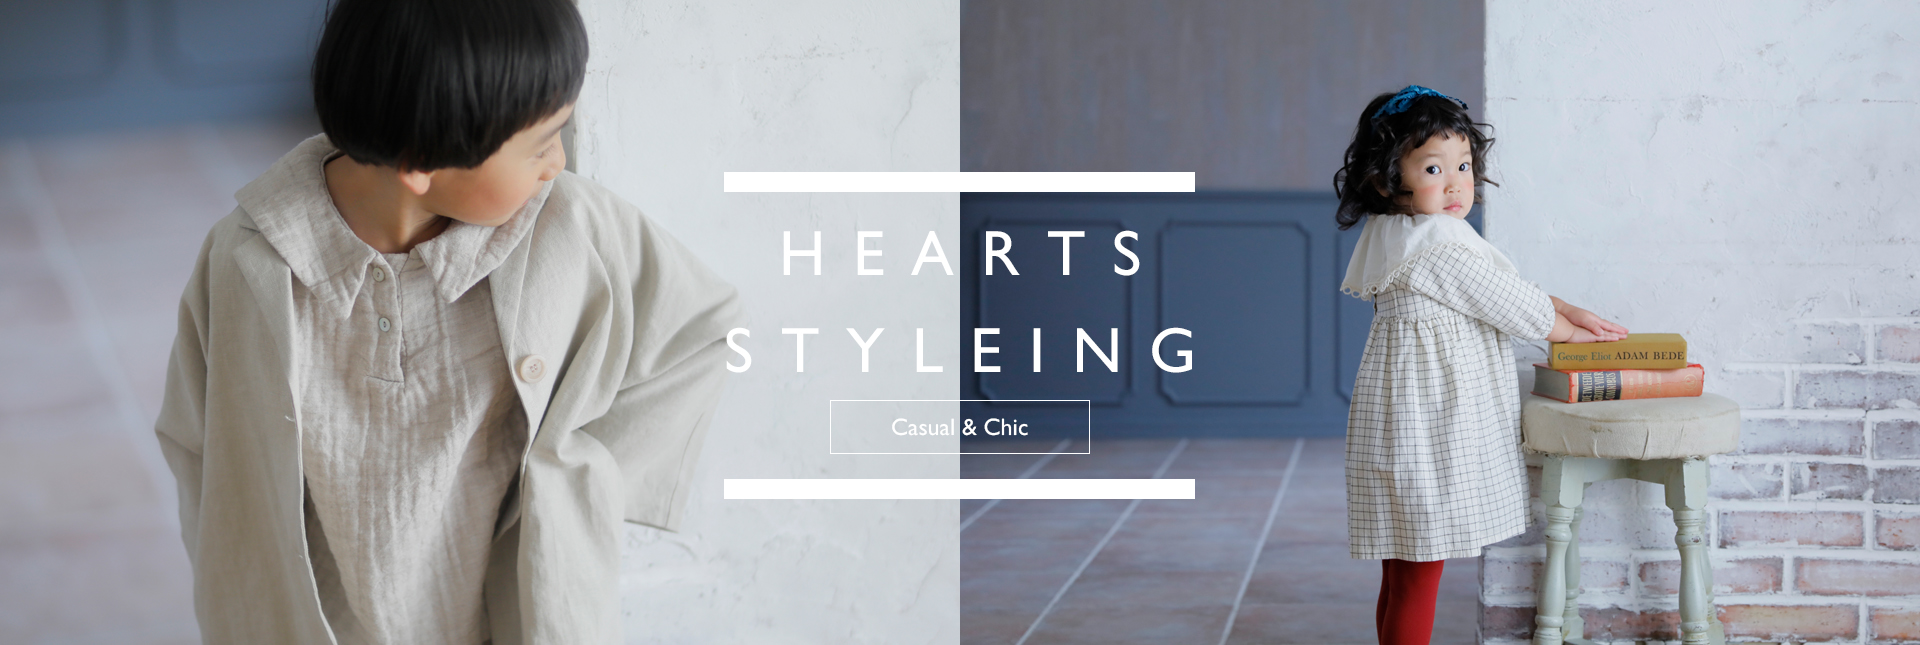 HEARTS STYLING